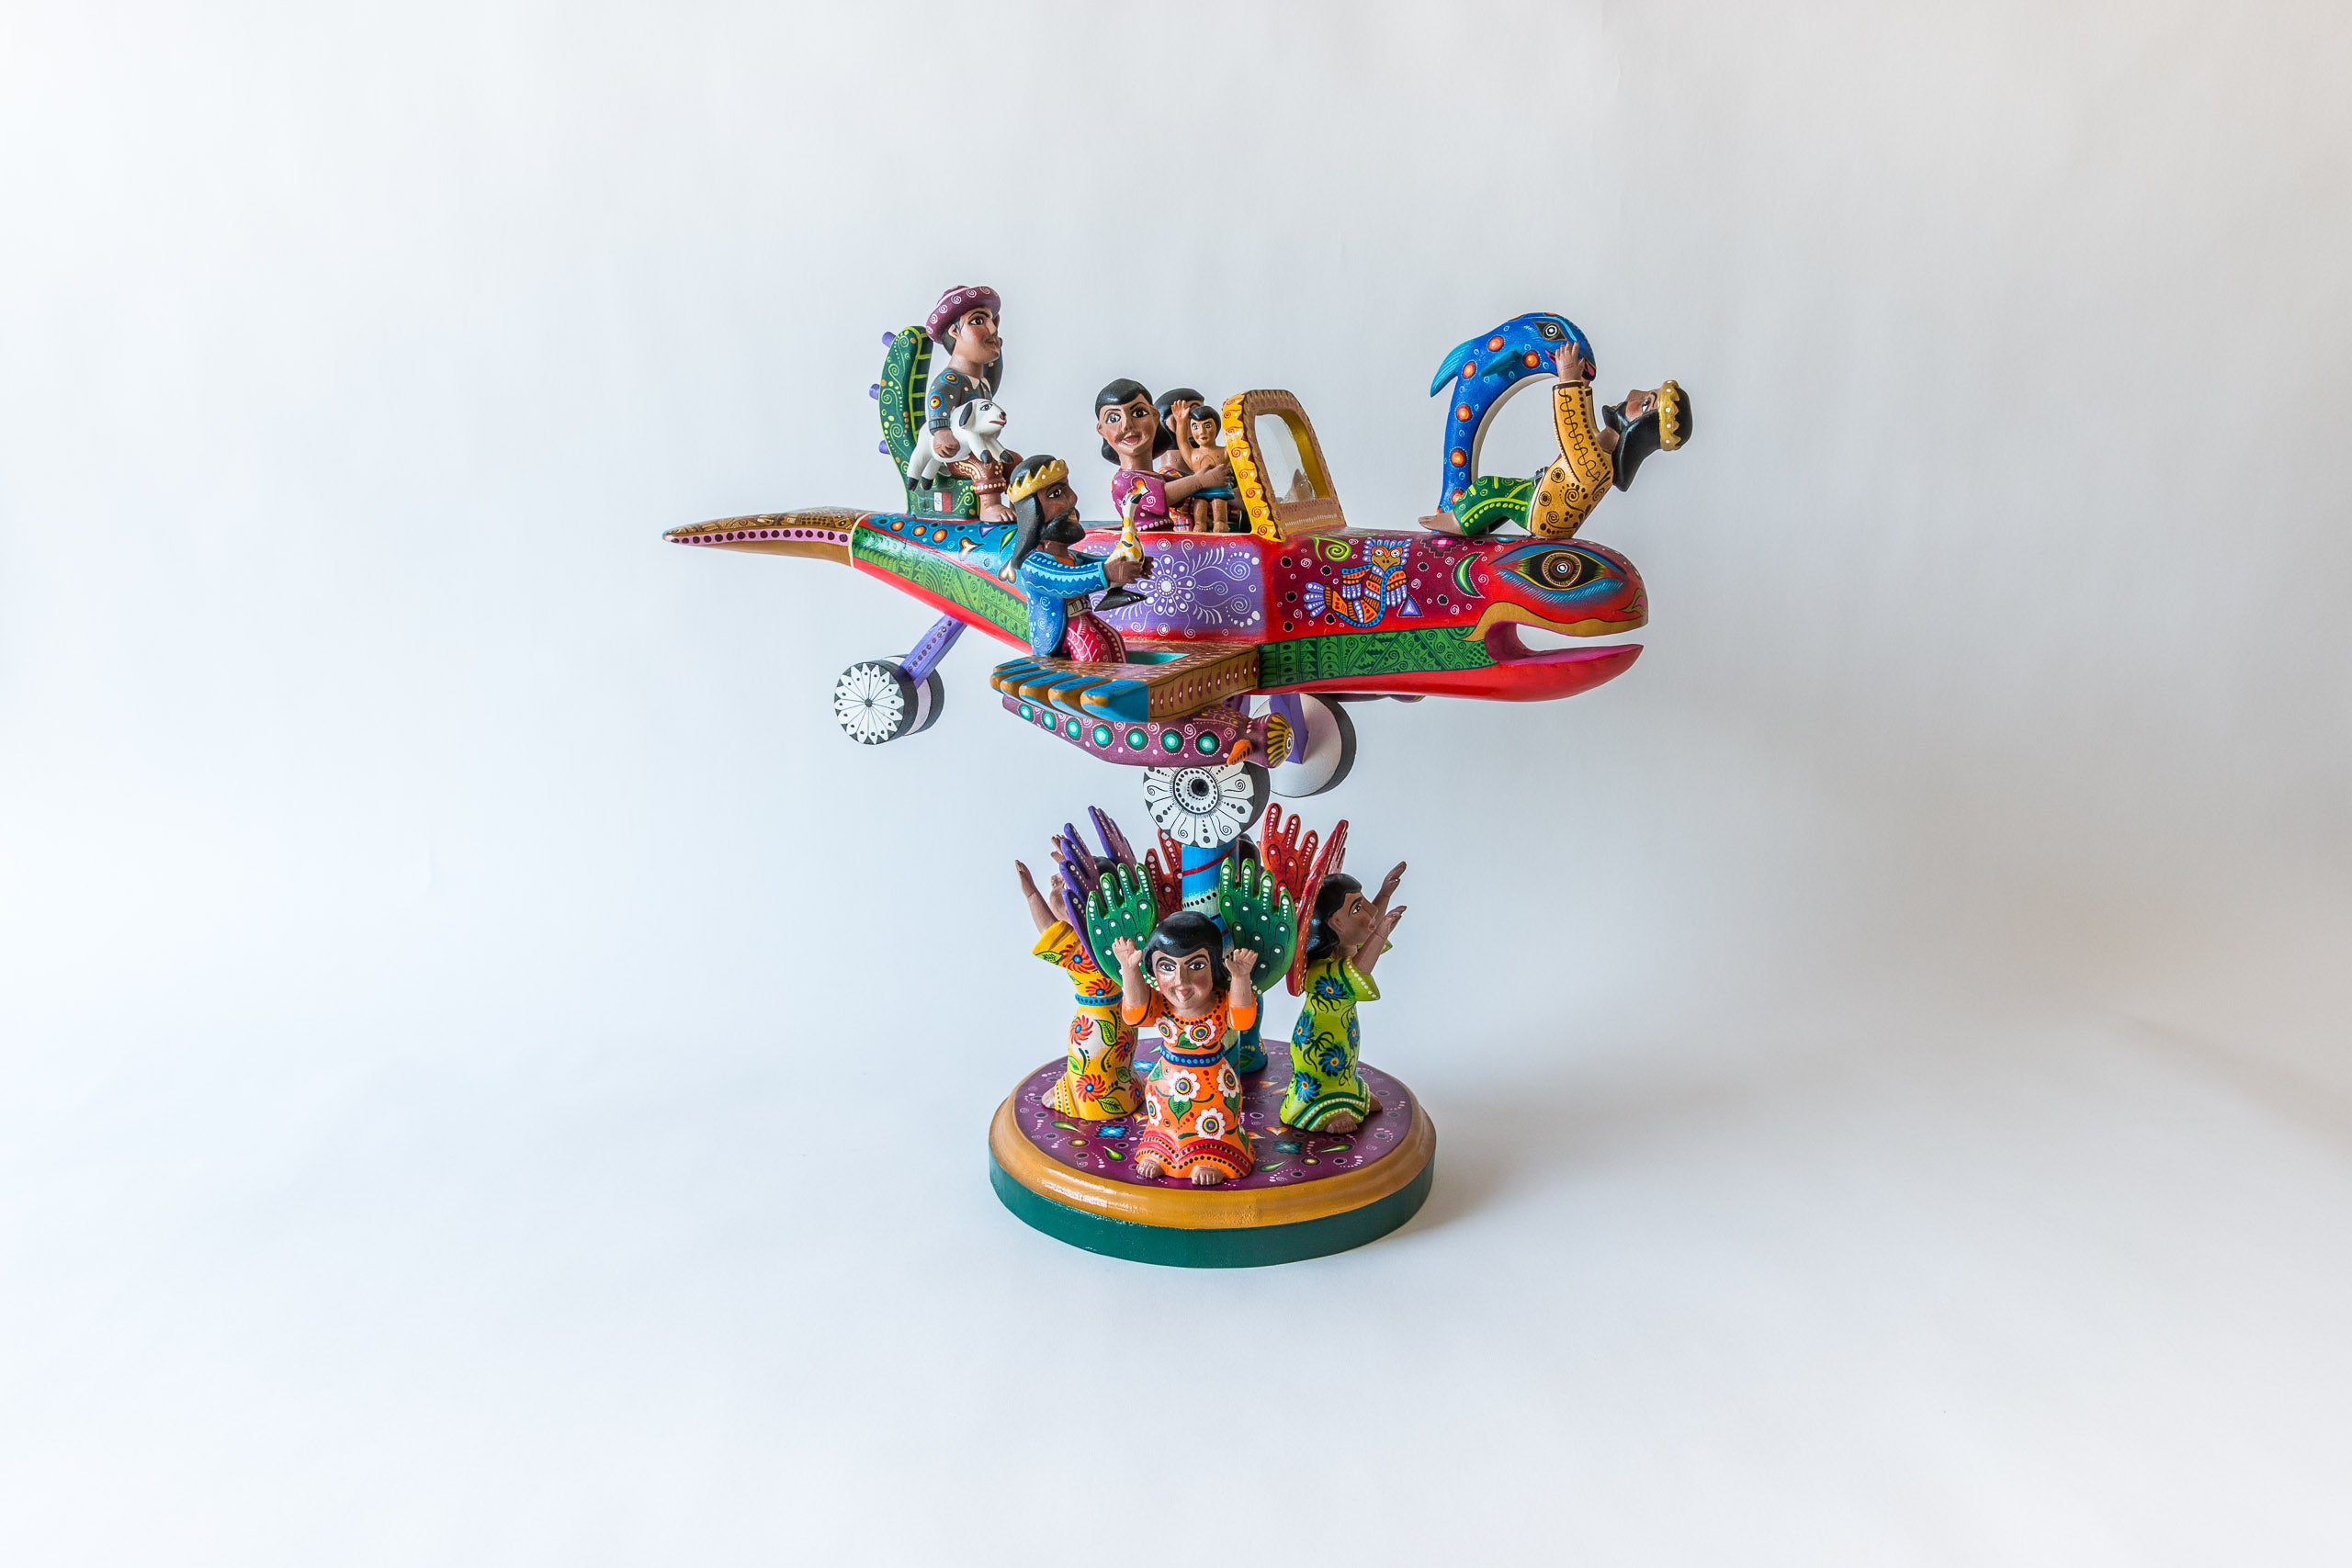 The Aeroplane Nativity was carved by master carver Agustin Cruz Tinoco (Oaxacan woodcarvings)and painted by his daughter Edilma Cruz Prudencio.